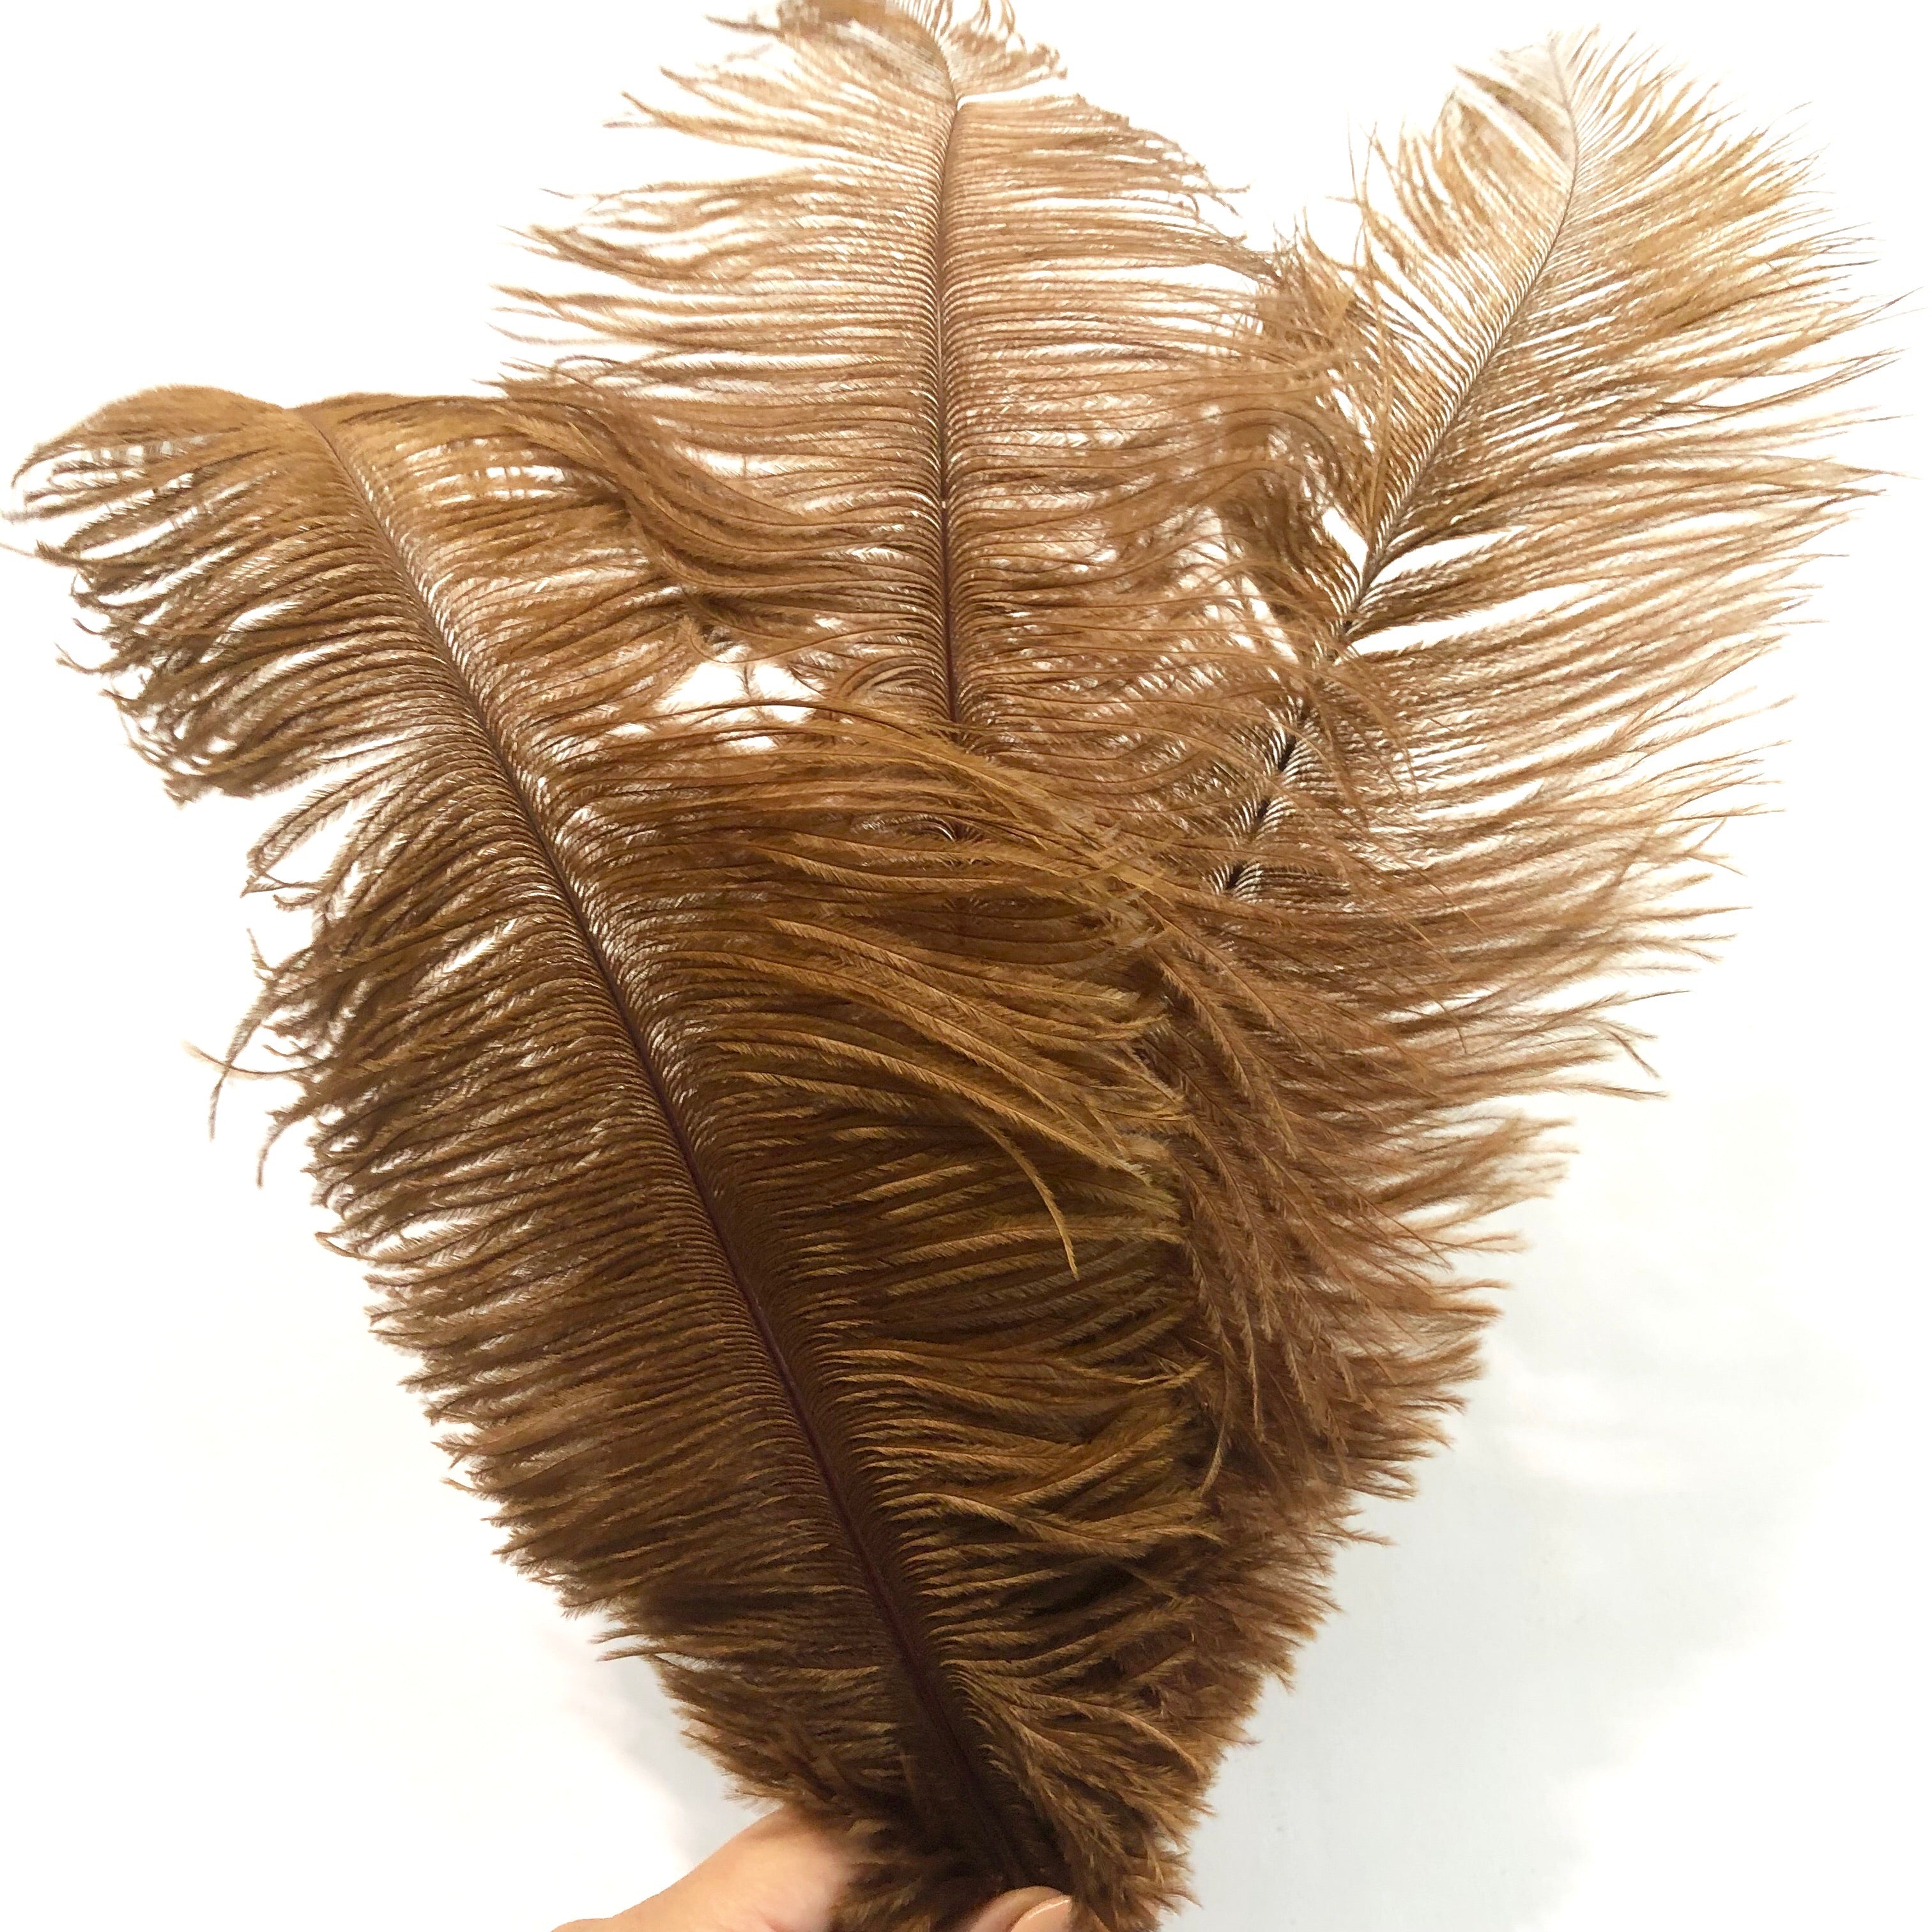 Ostrich Drab Feather 27-32cm - Rust Brown